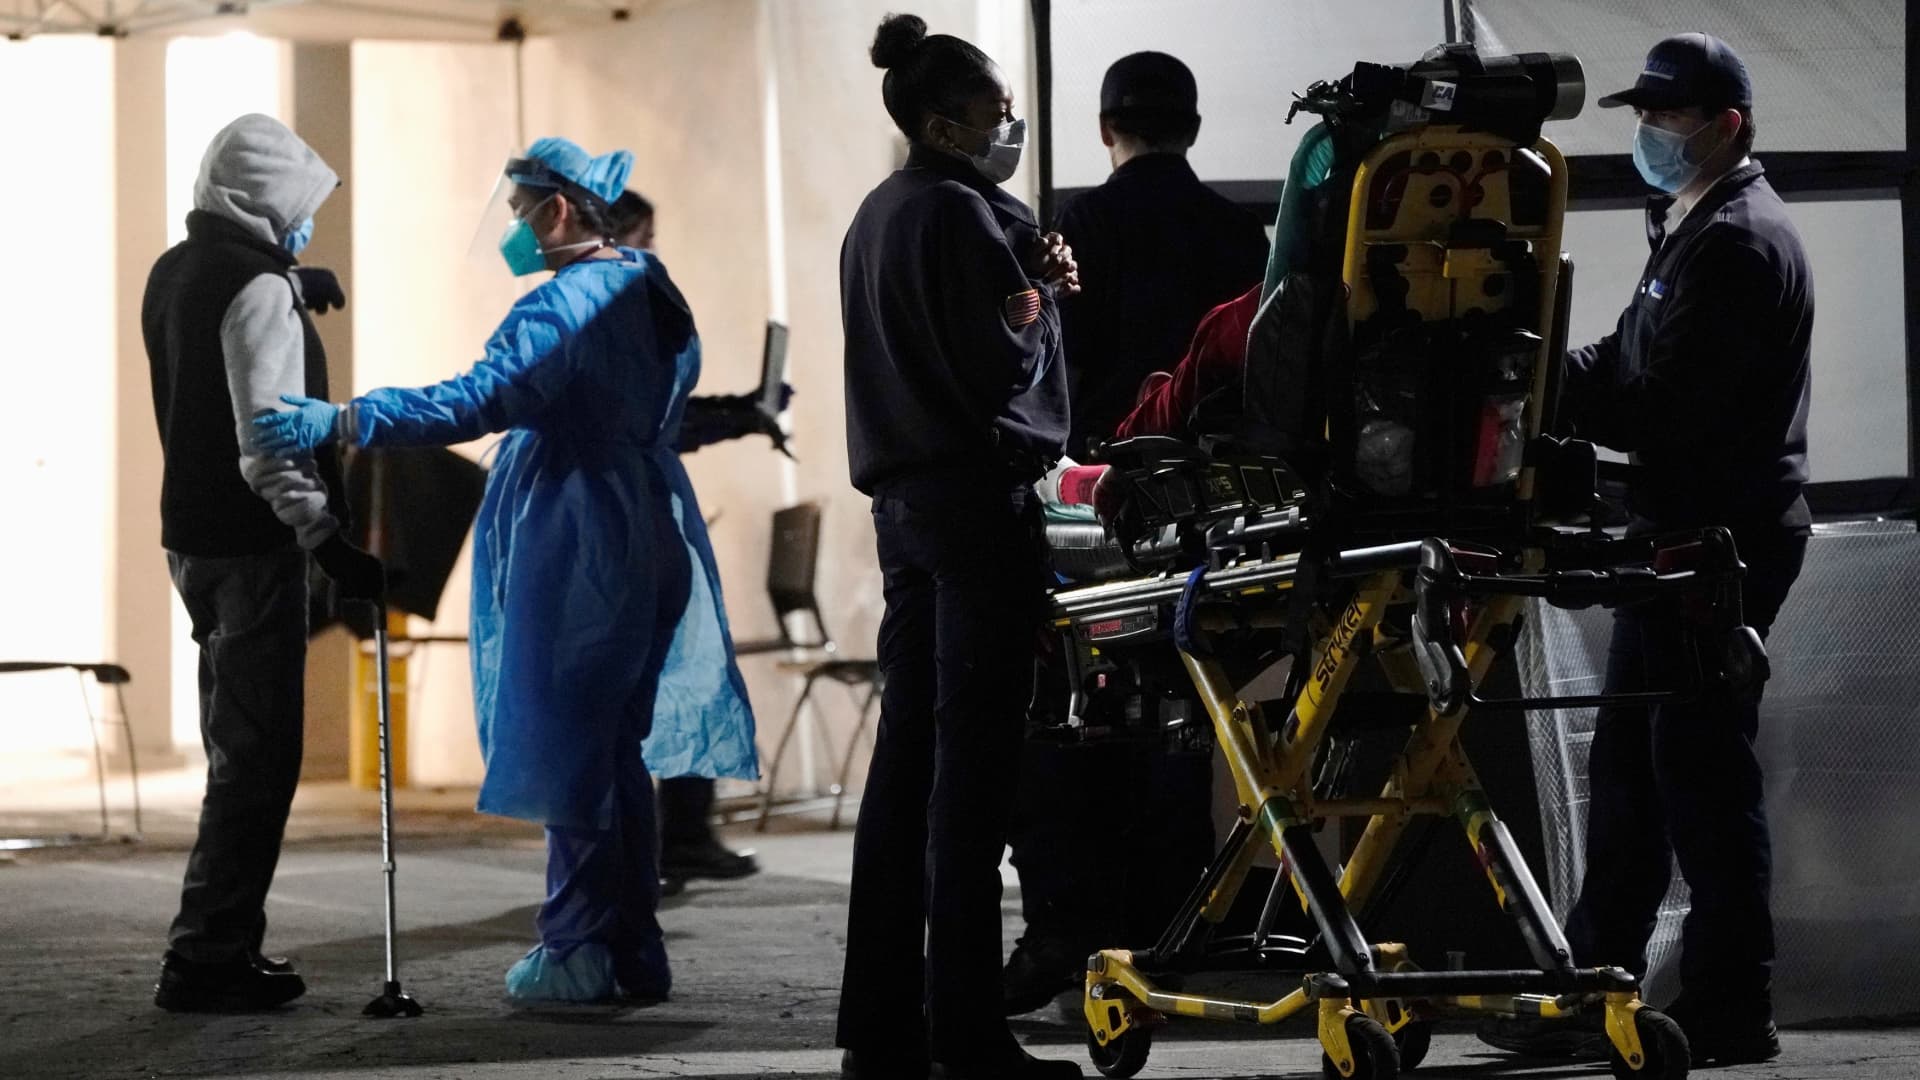 Emergency medical technicians (EMTs) and healthcare workers treat patients outside the emergency room at the Community Hospital of Huntington Park during a surge in positive coronavirus disease (COVID-19) cases in Huntington Park, California, December 29, 2020.